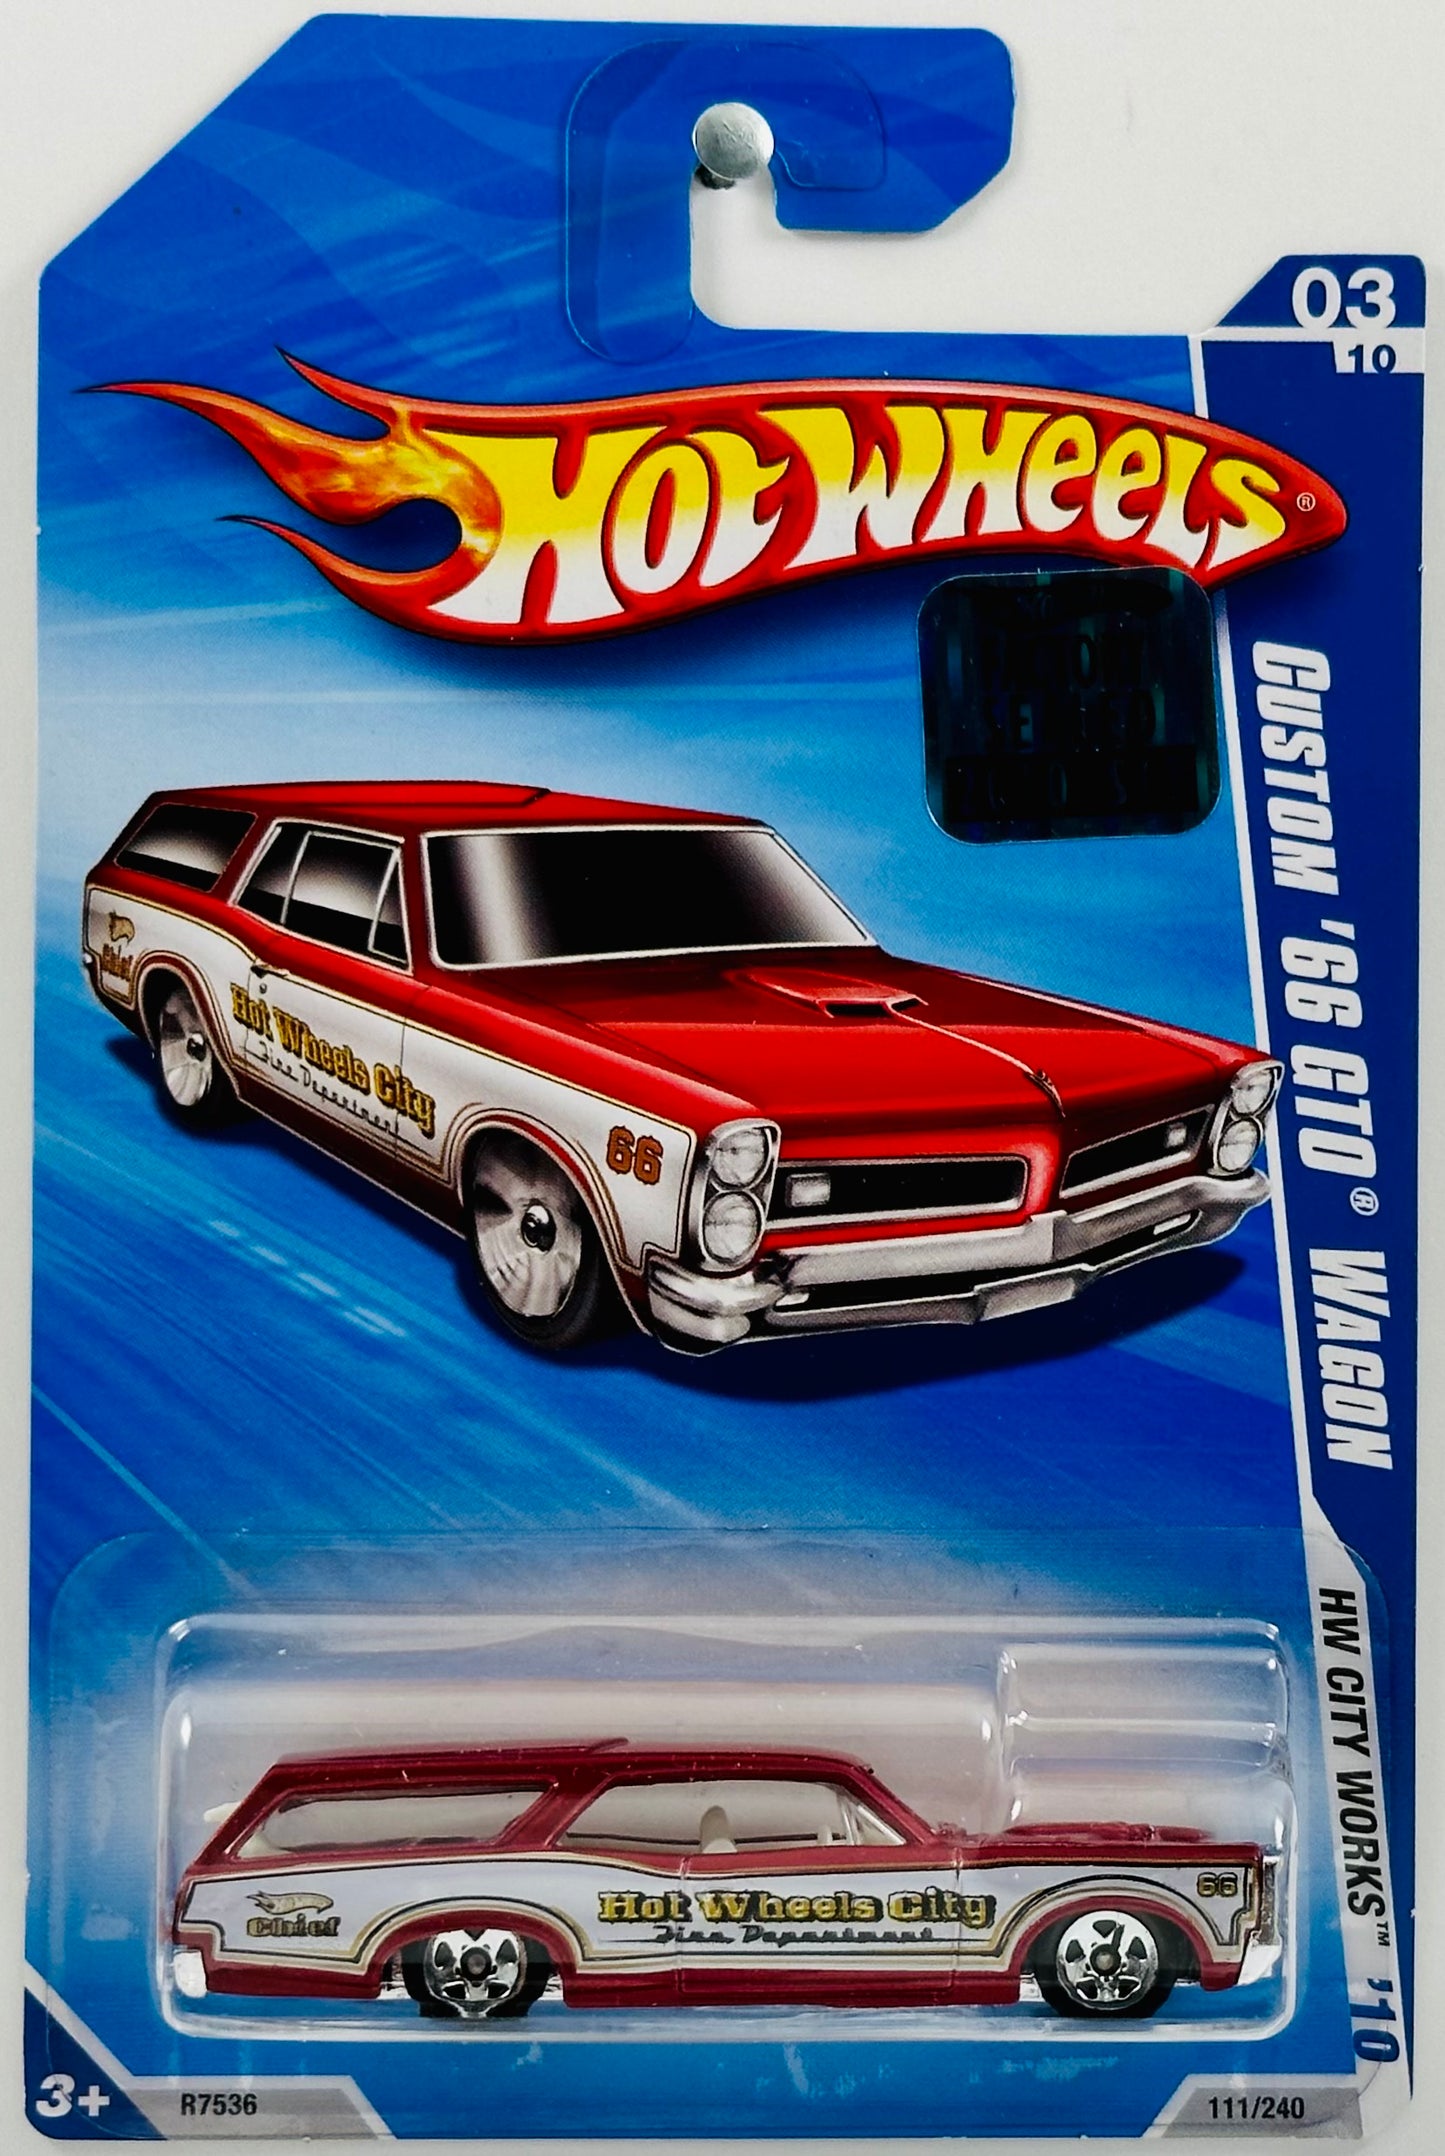 Hot Wheels 2010 - Collector # 111/240 - HW City Works 3/10 - Custom ’66 GTO Wagon - Red / Fire Department - Dog in the back - FSC